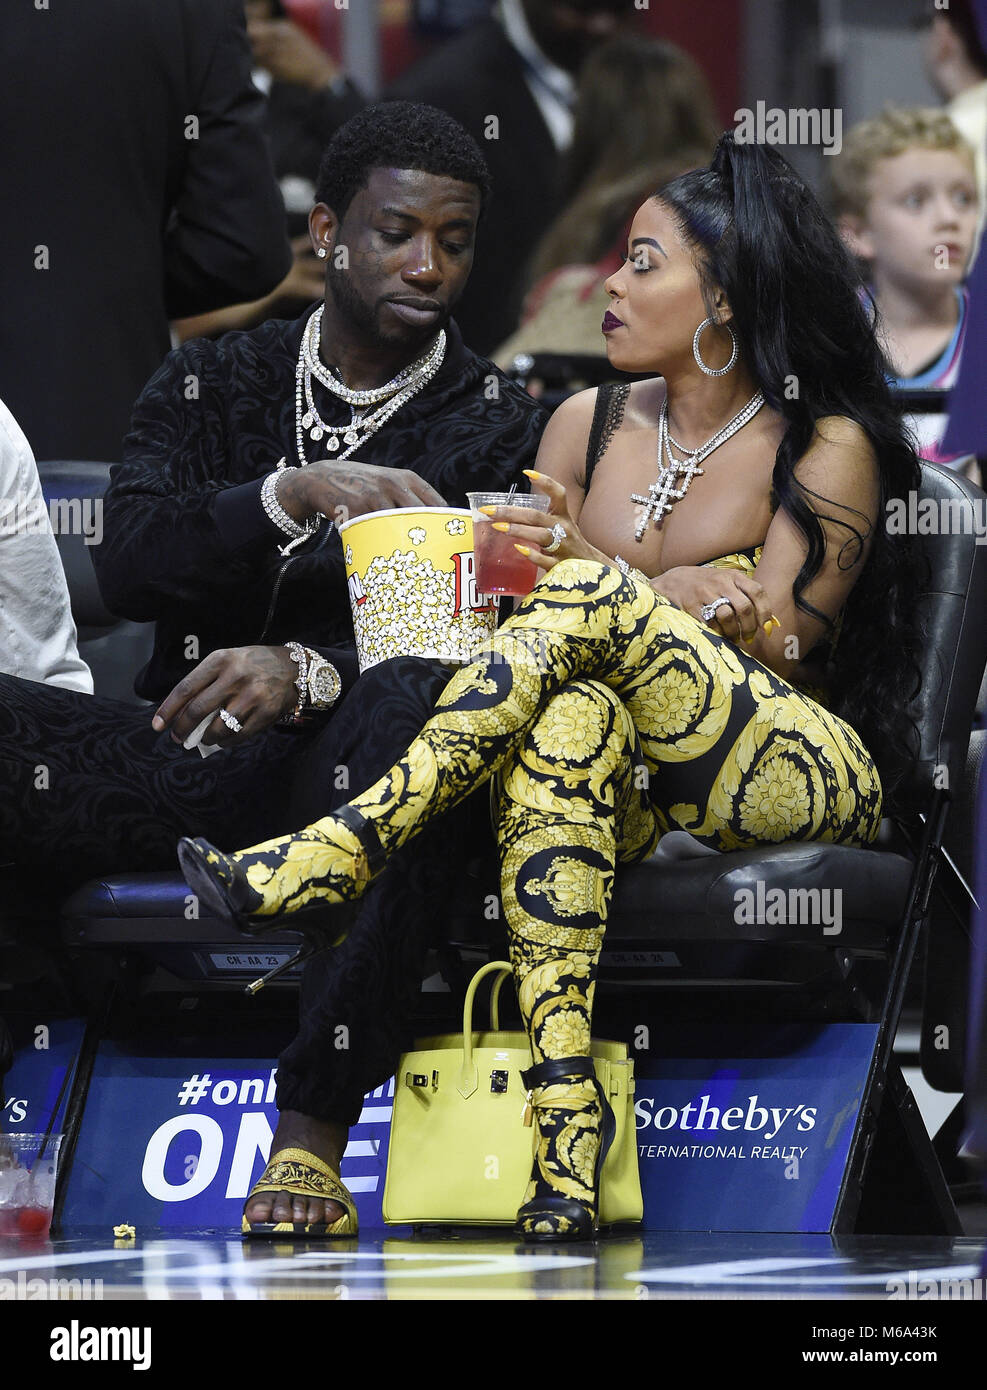 Gucci gang! Gucci Mane's wife Keyshia Kaoir flashes her diamond wedding  ring as she poses with the rapper